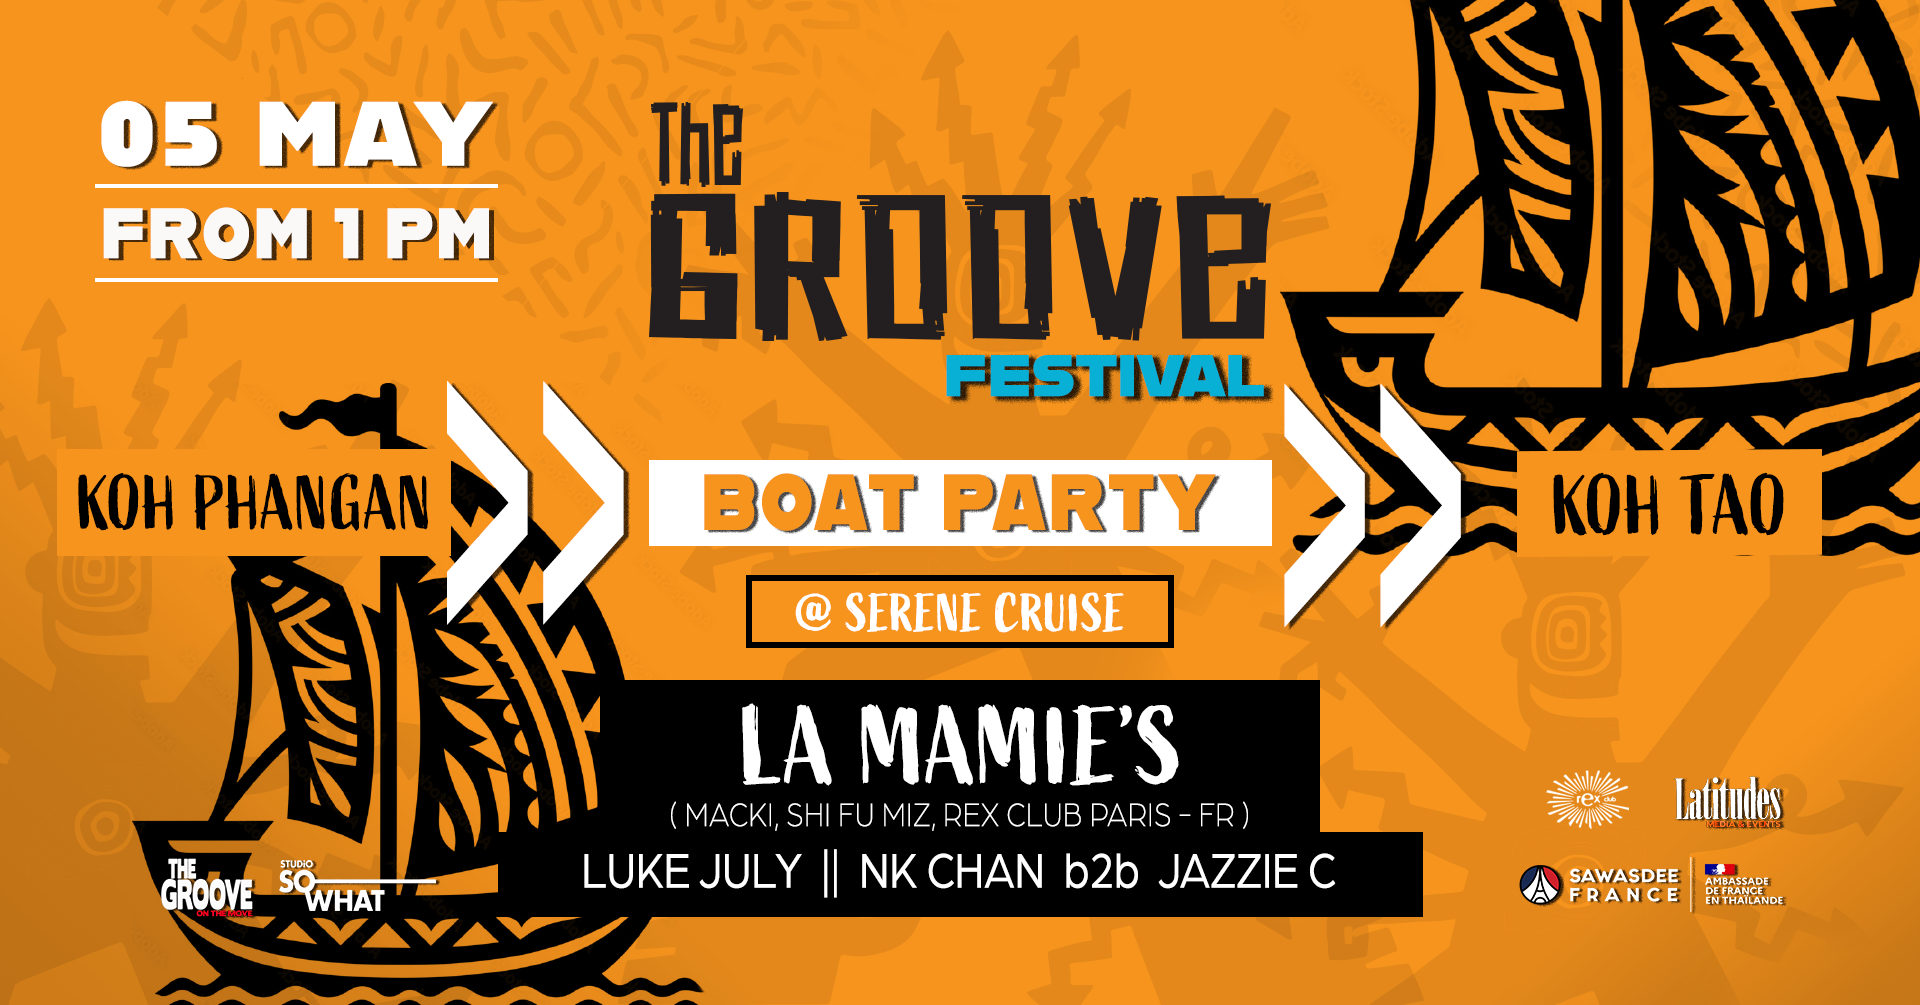 The Groove Boat party from Phangan to Tao - フライヤー表